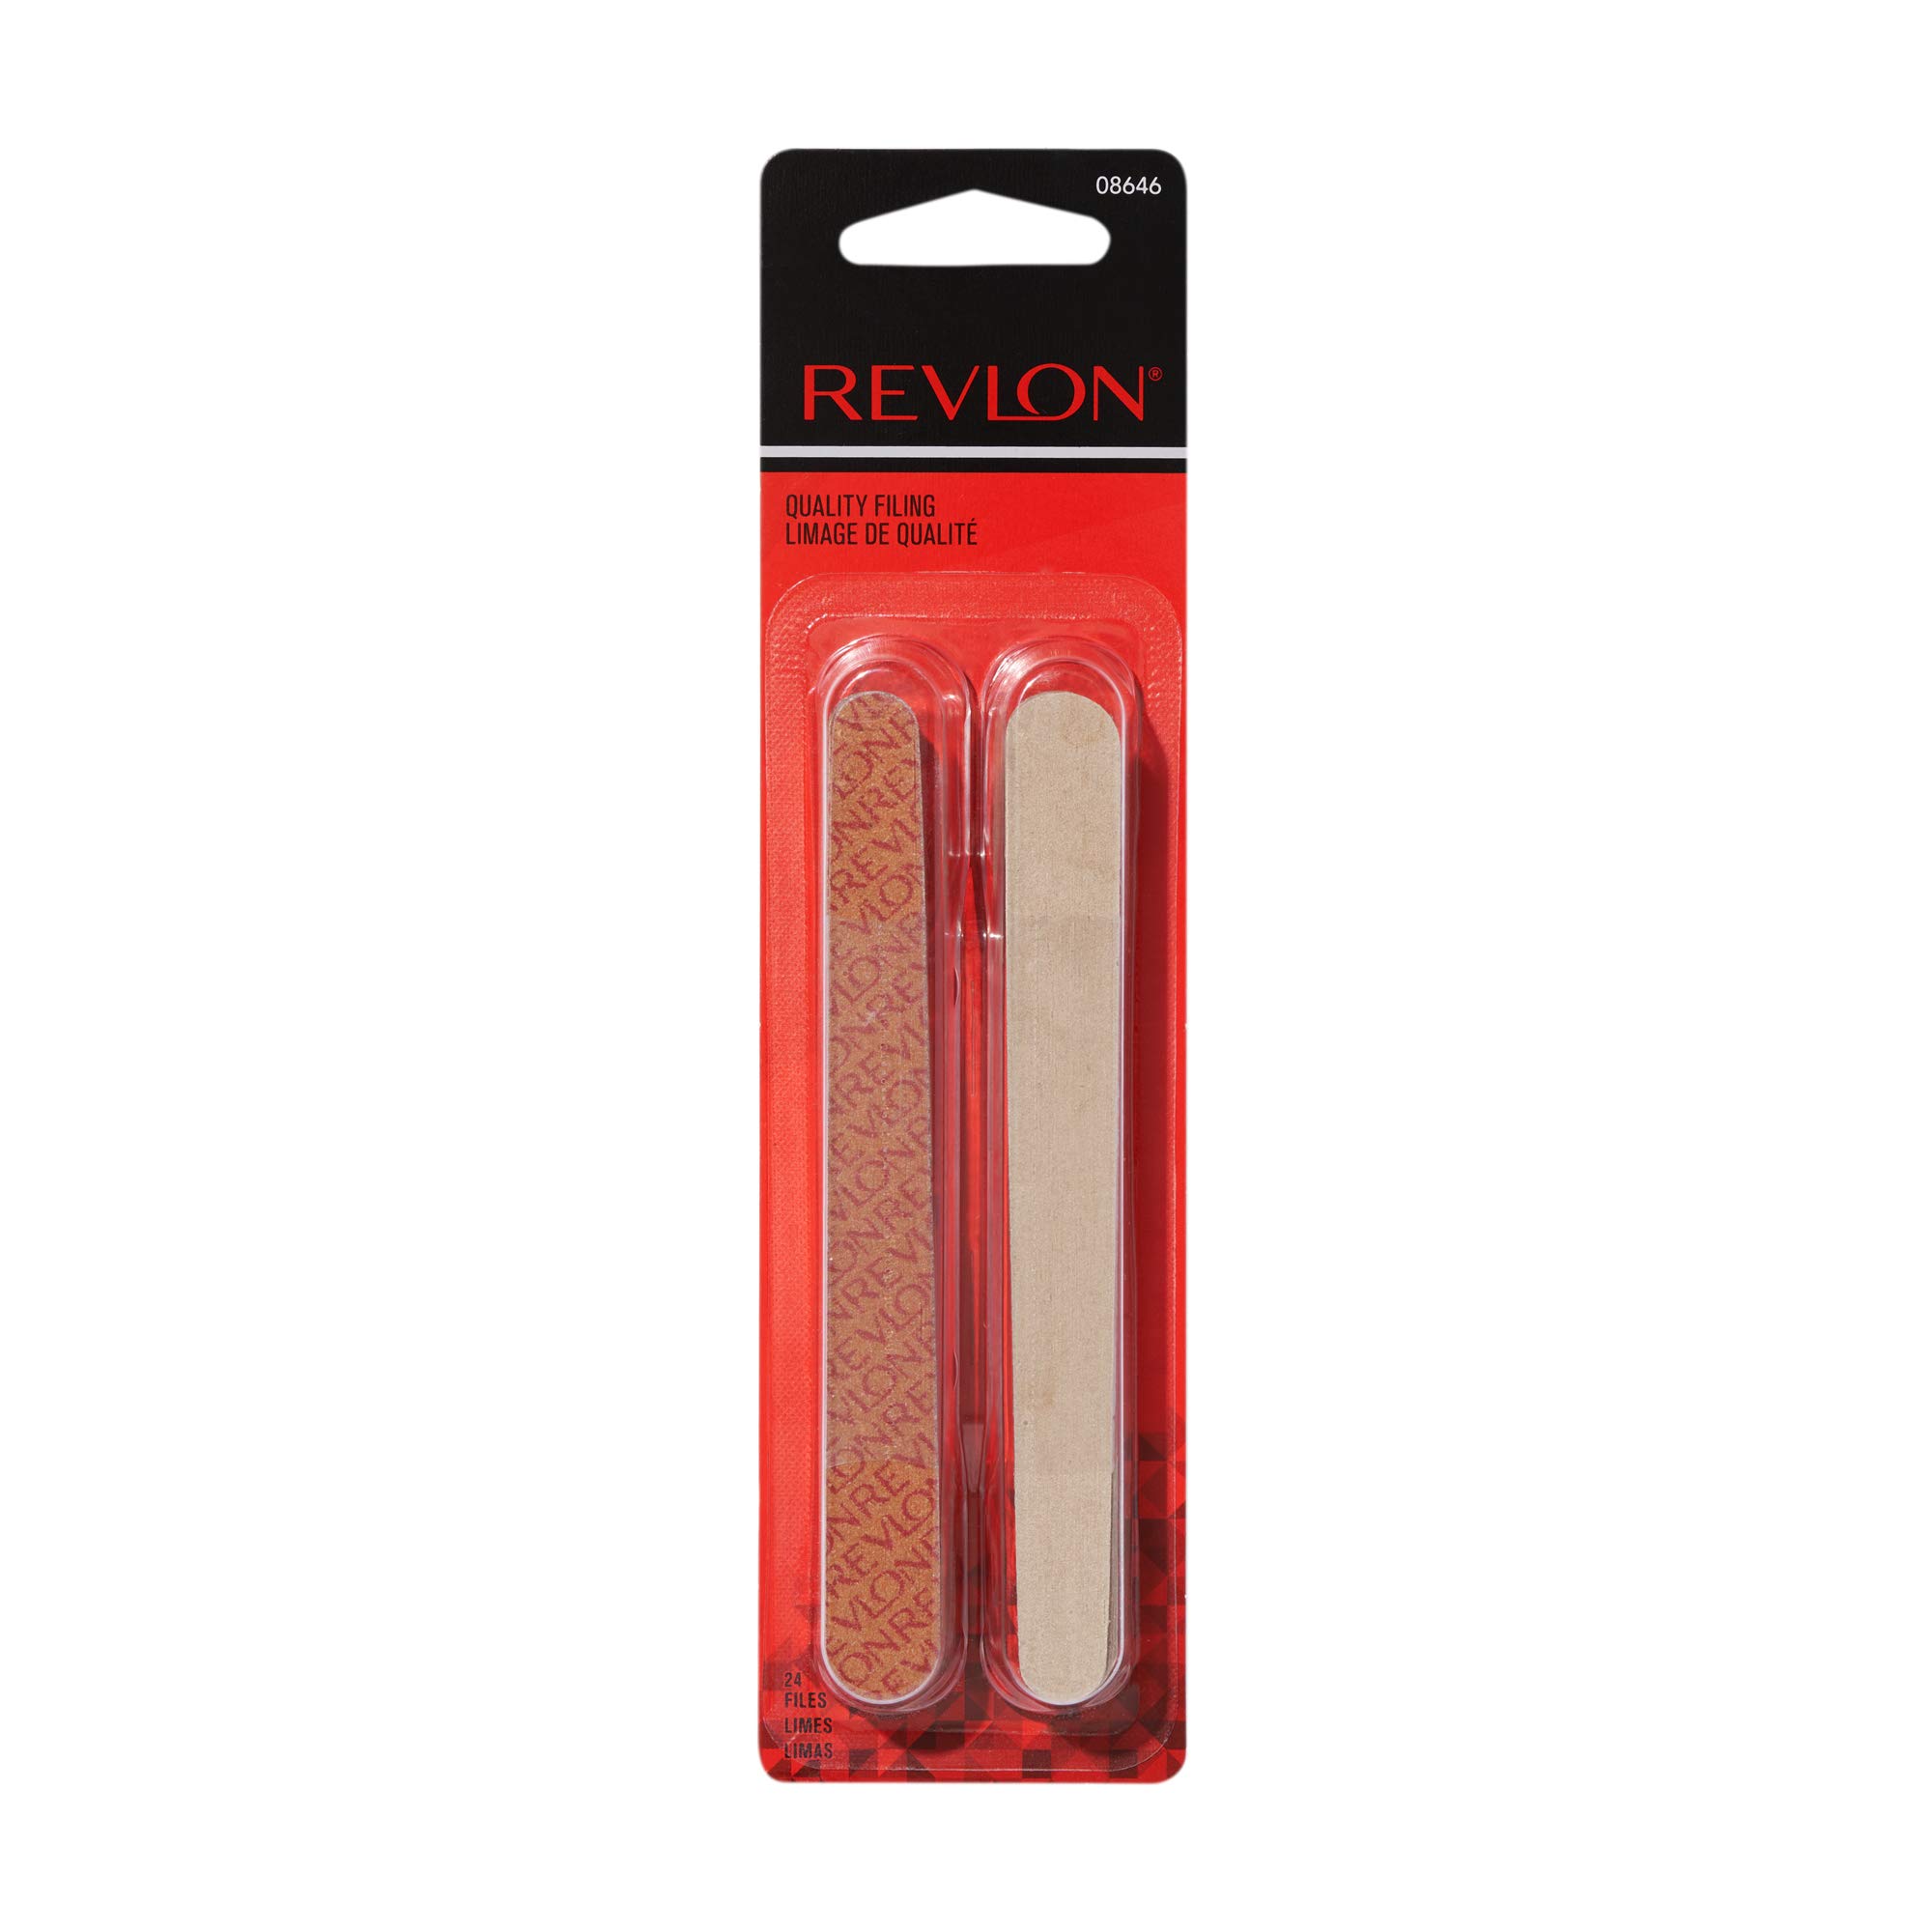 Revlon Compact Nail File, Dual Sided Nail Care Tool, Smooths & Shapes Nails, Easy to Use, Compact Emery Boards (Pack of 24)